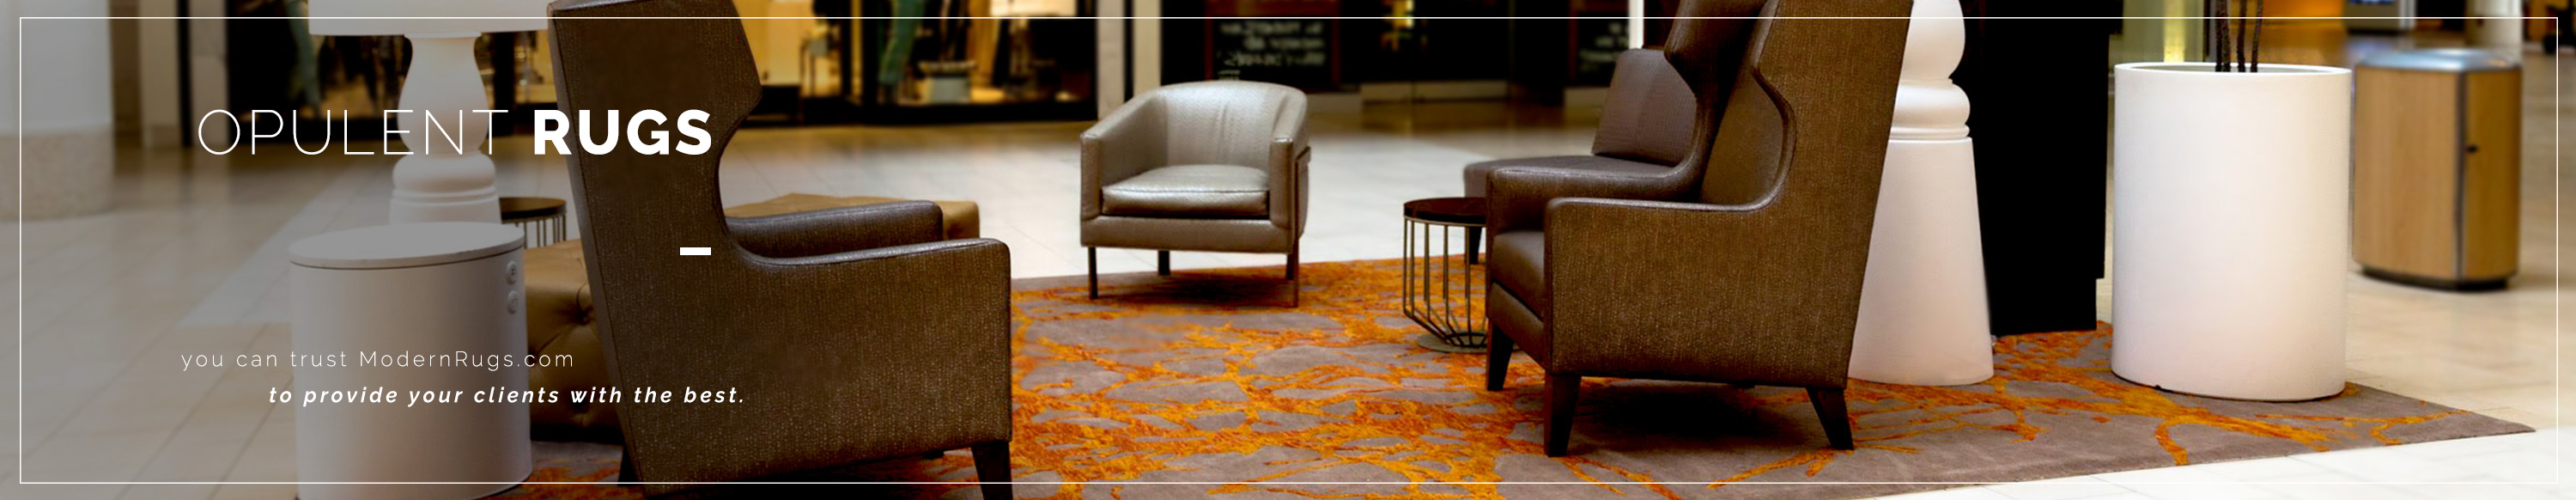 Your customers deserve opulence. You can trust ModernRugs.com to provide it for them.